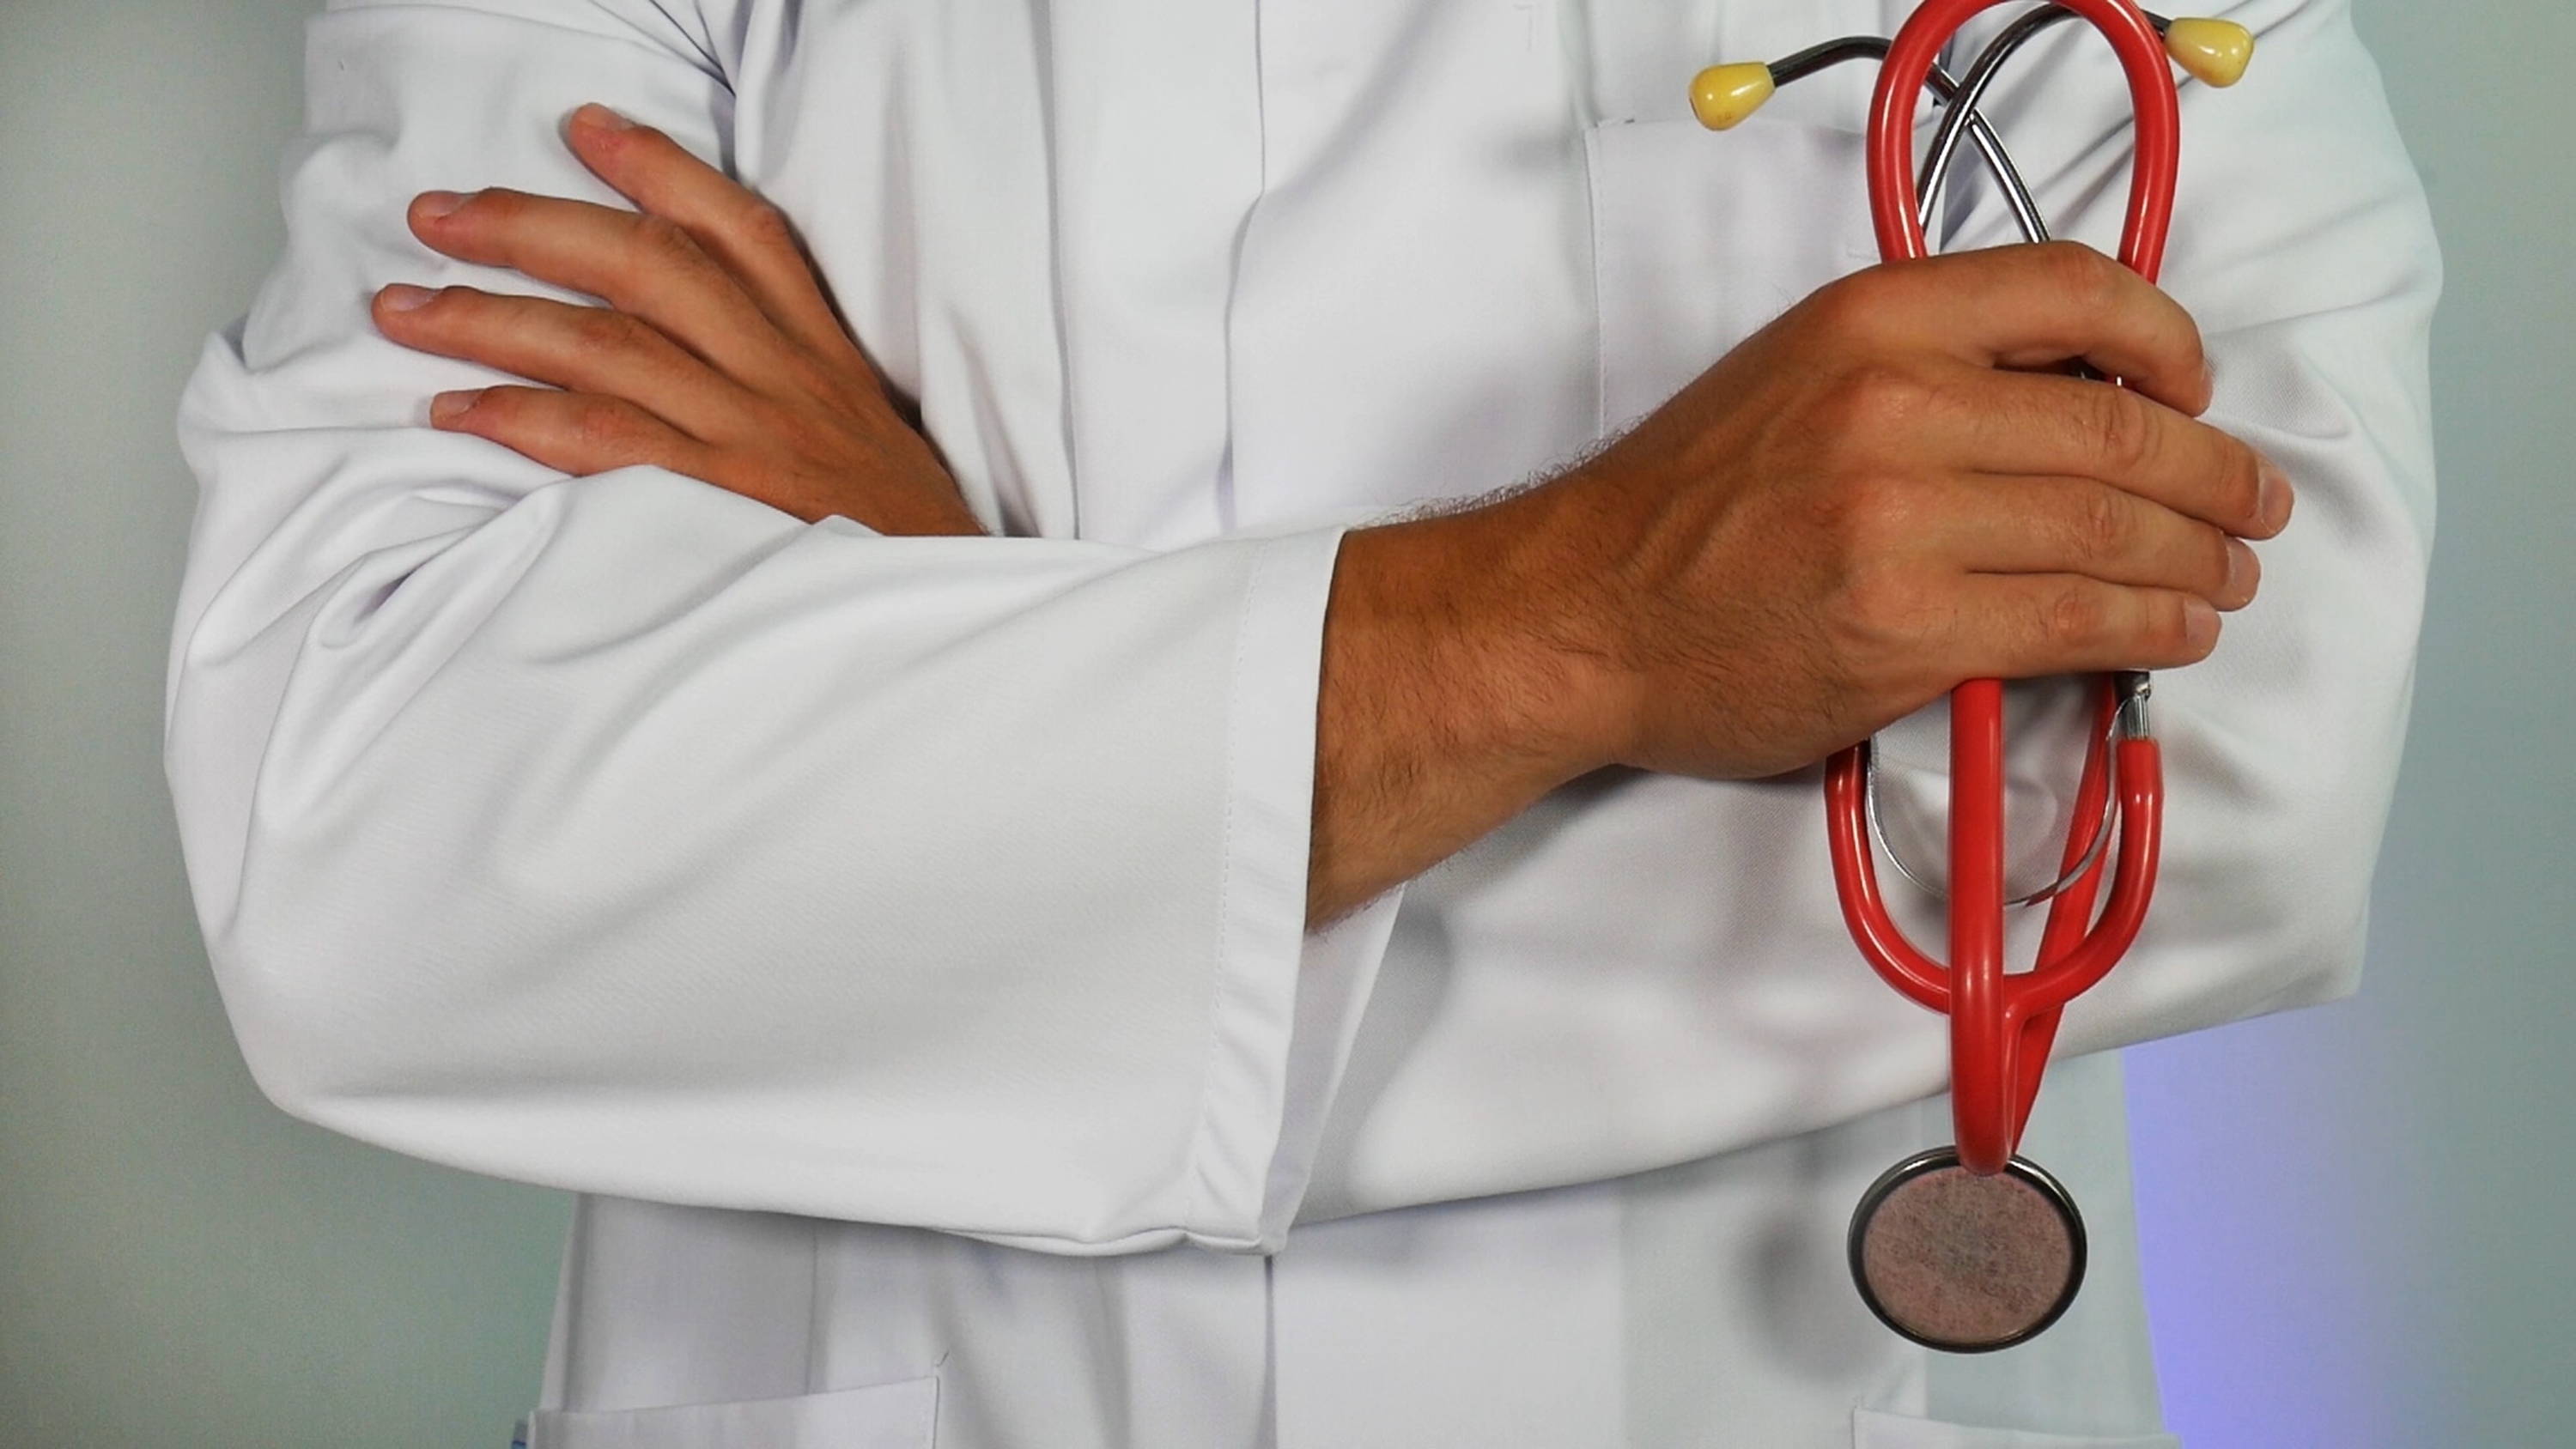 The chest of a doctor stands with arms crossed in front and holding a stethoscope.